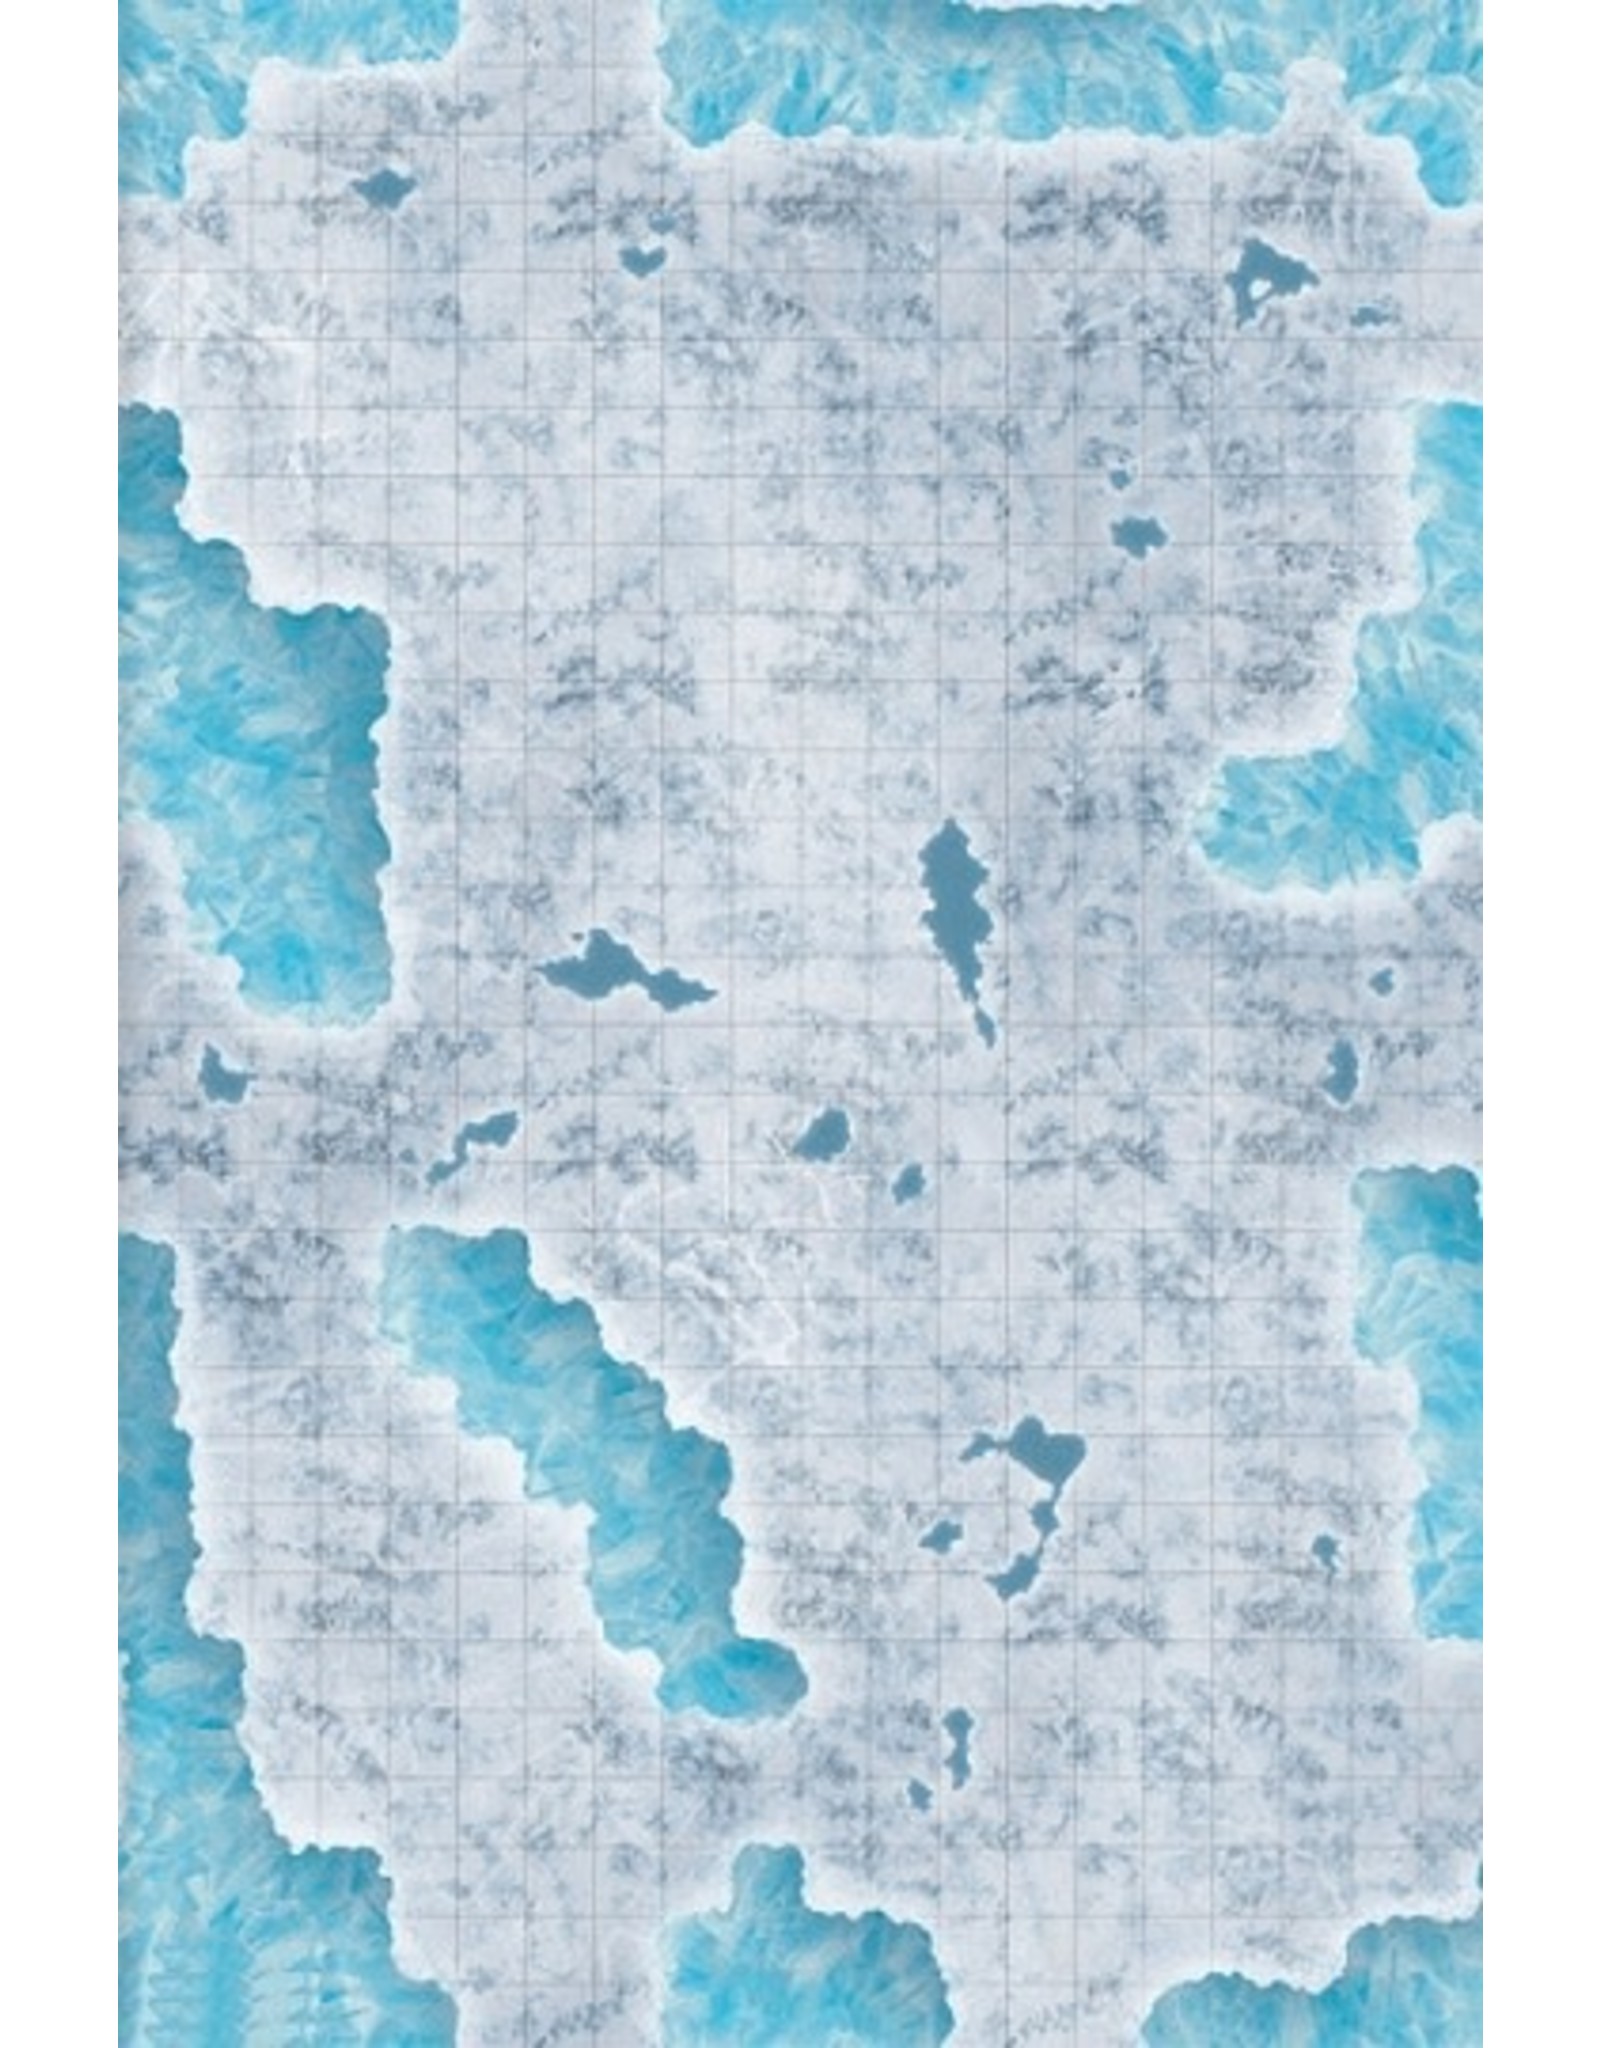 Gale Force 9 Dungeons and Dragons Battlefield:  Caverns of Ice Encounter Map (30" x 20")